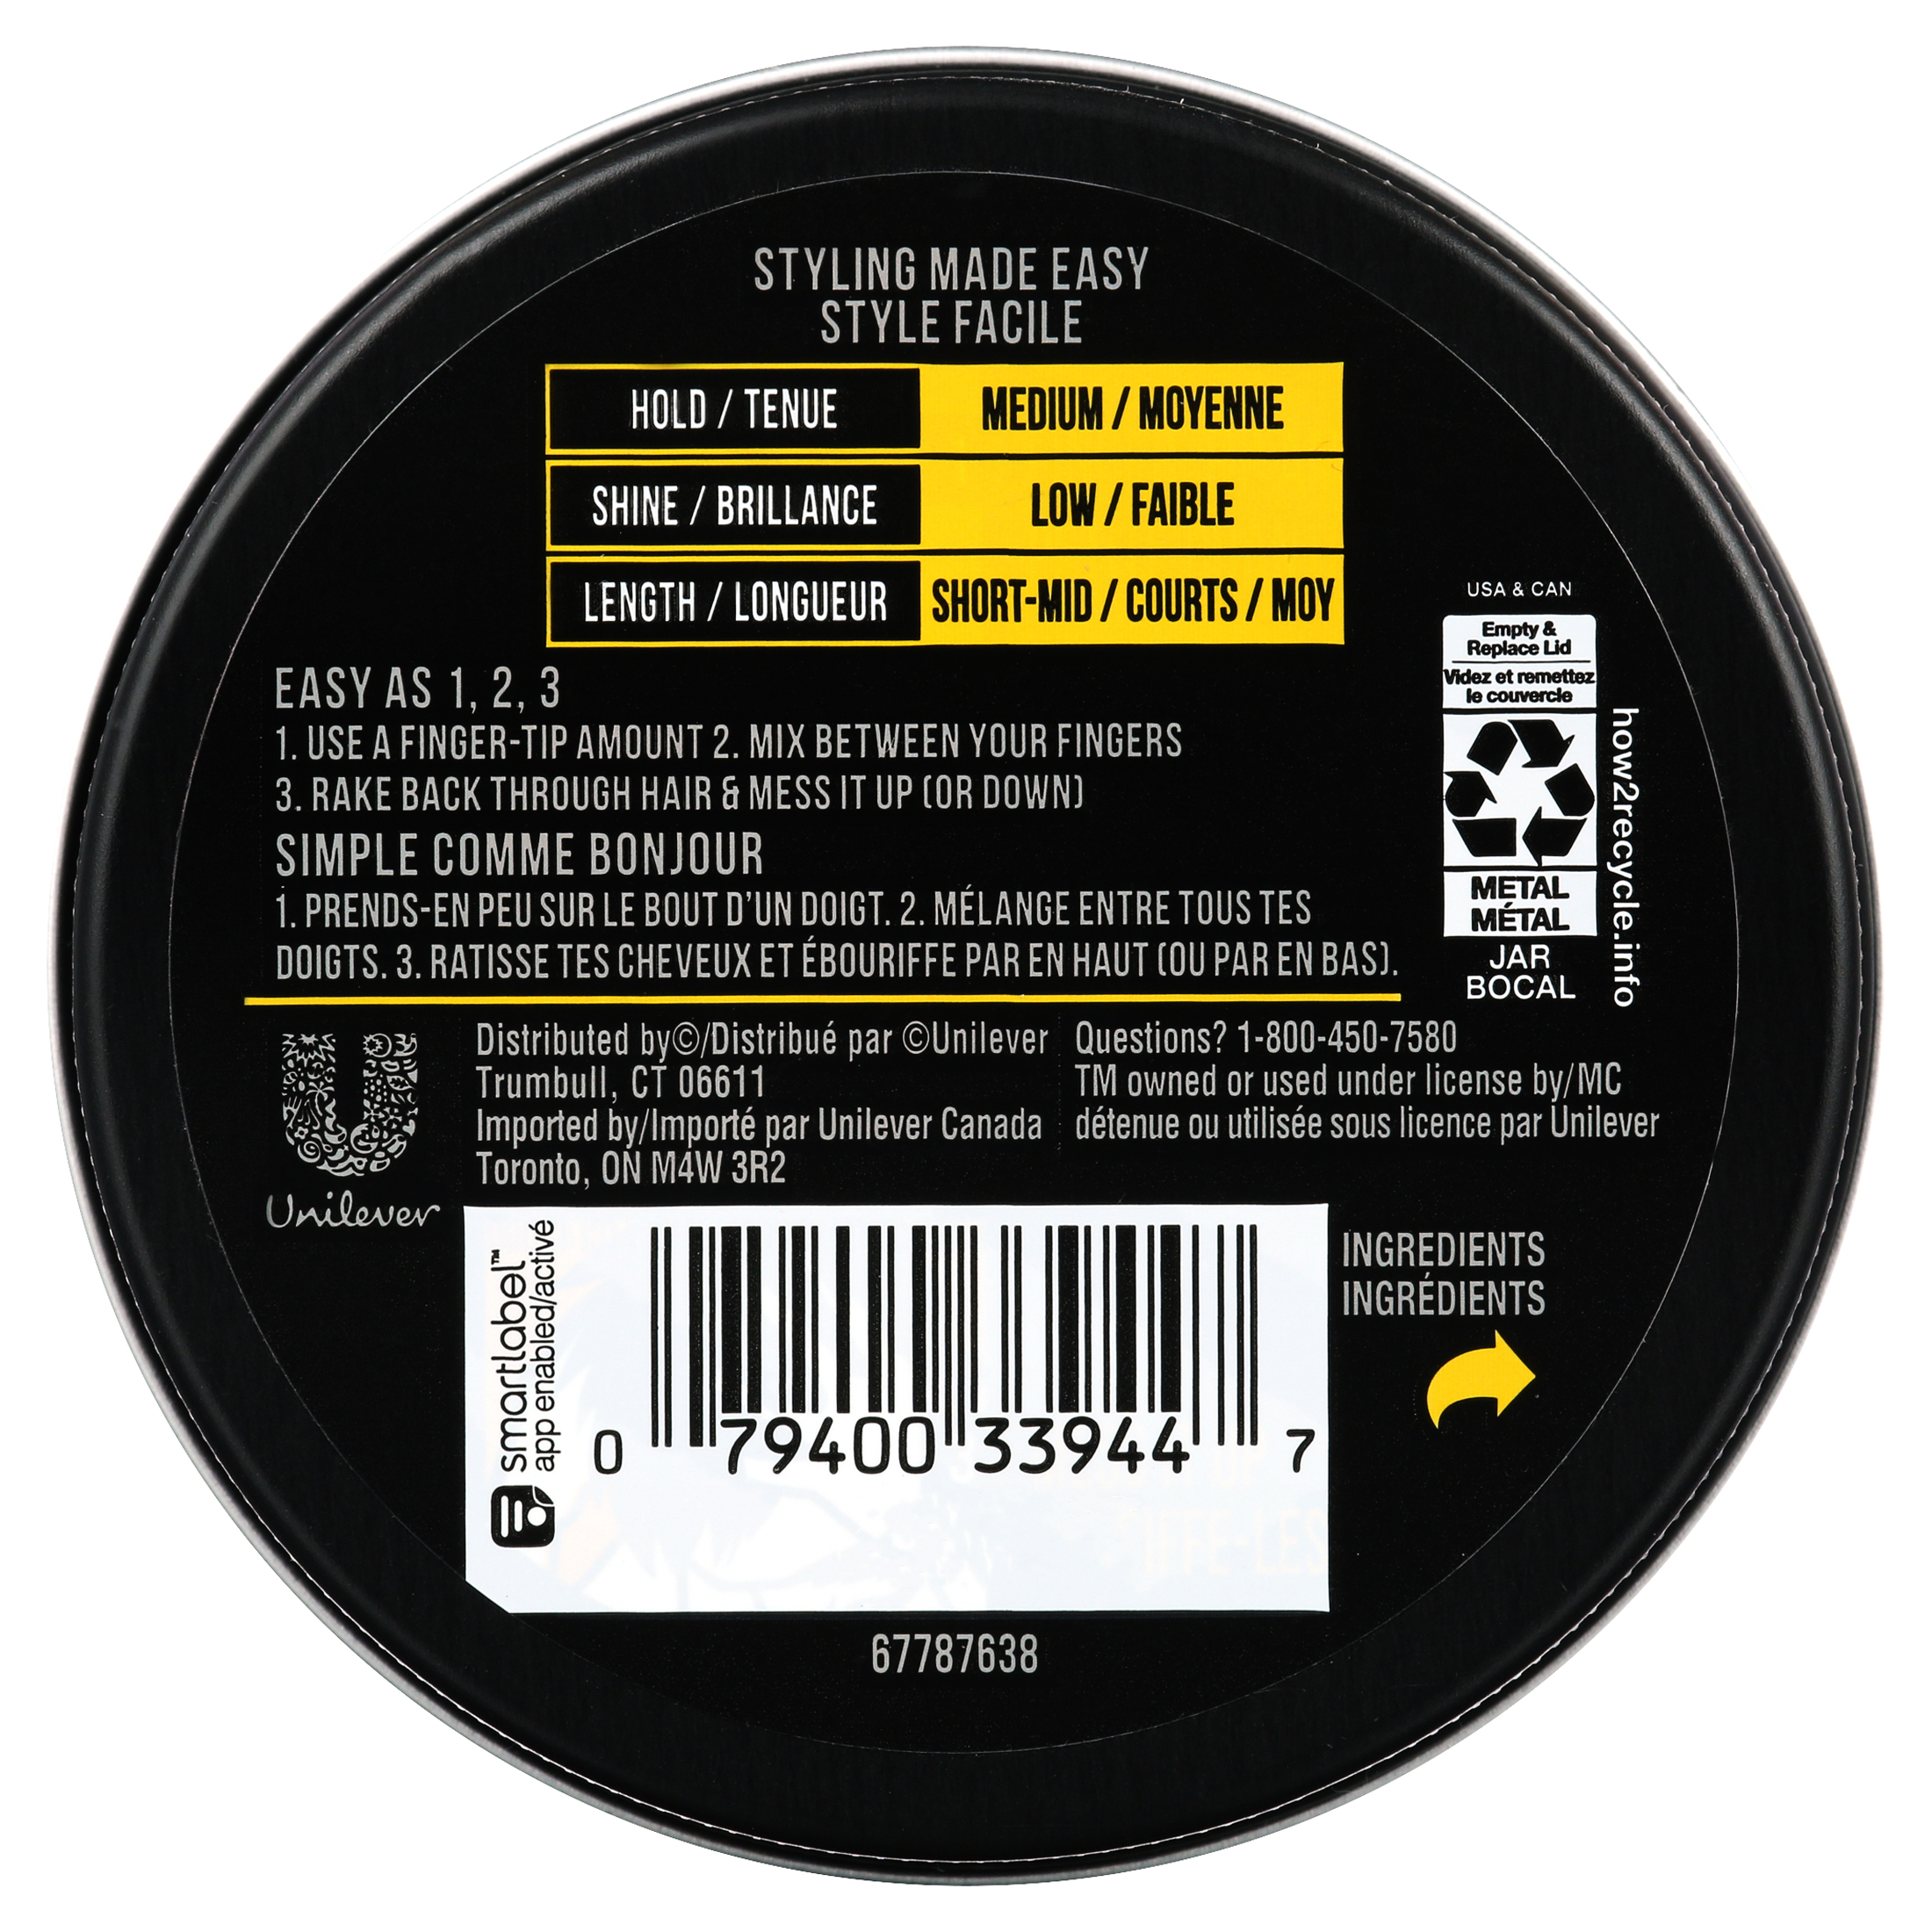 Axe Styling Messy Look Flexible Texturizing Hair Styling Gel, 2.64 oz - image 2 of 6